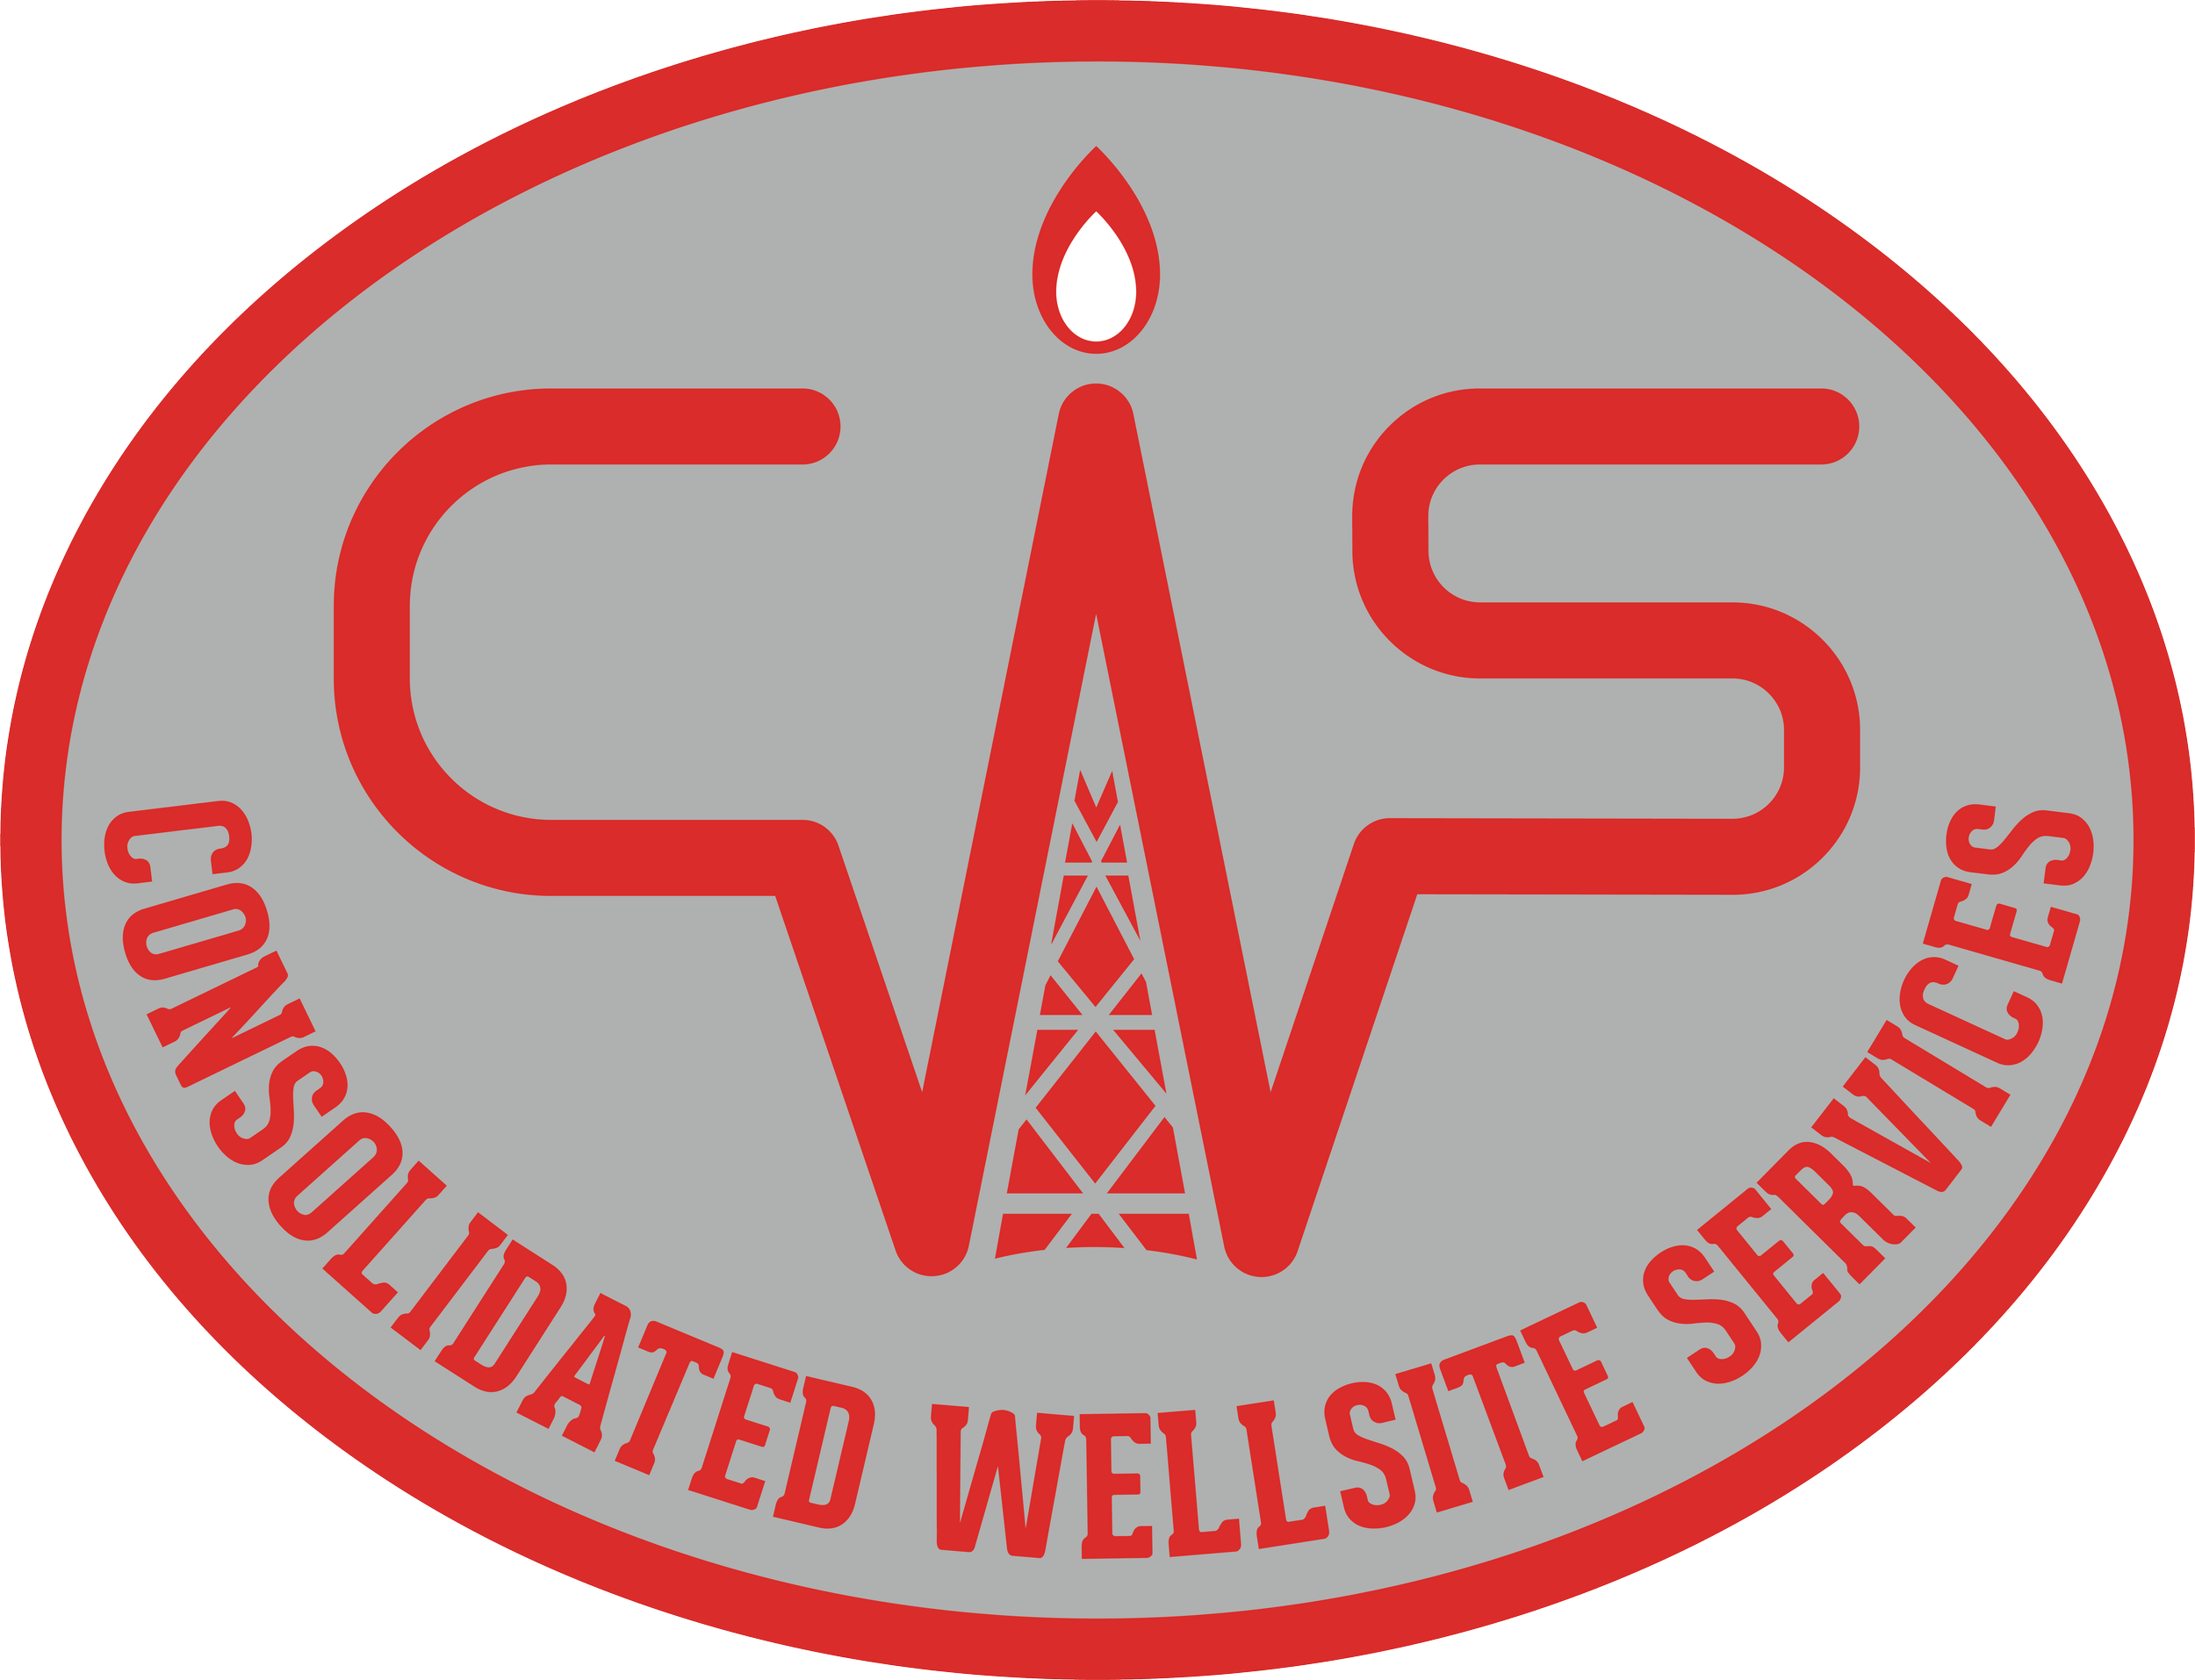 Consolidated Wellsite Services.png